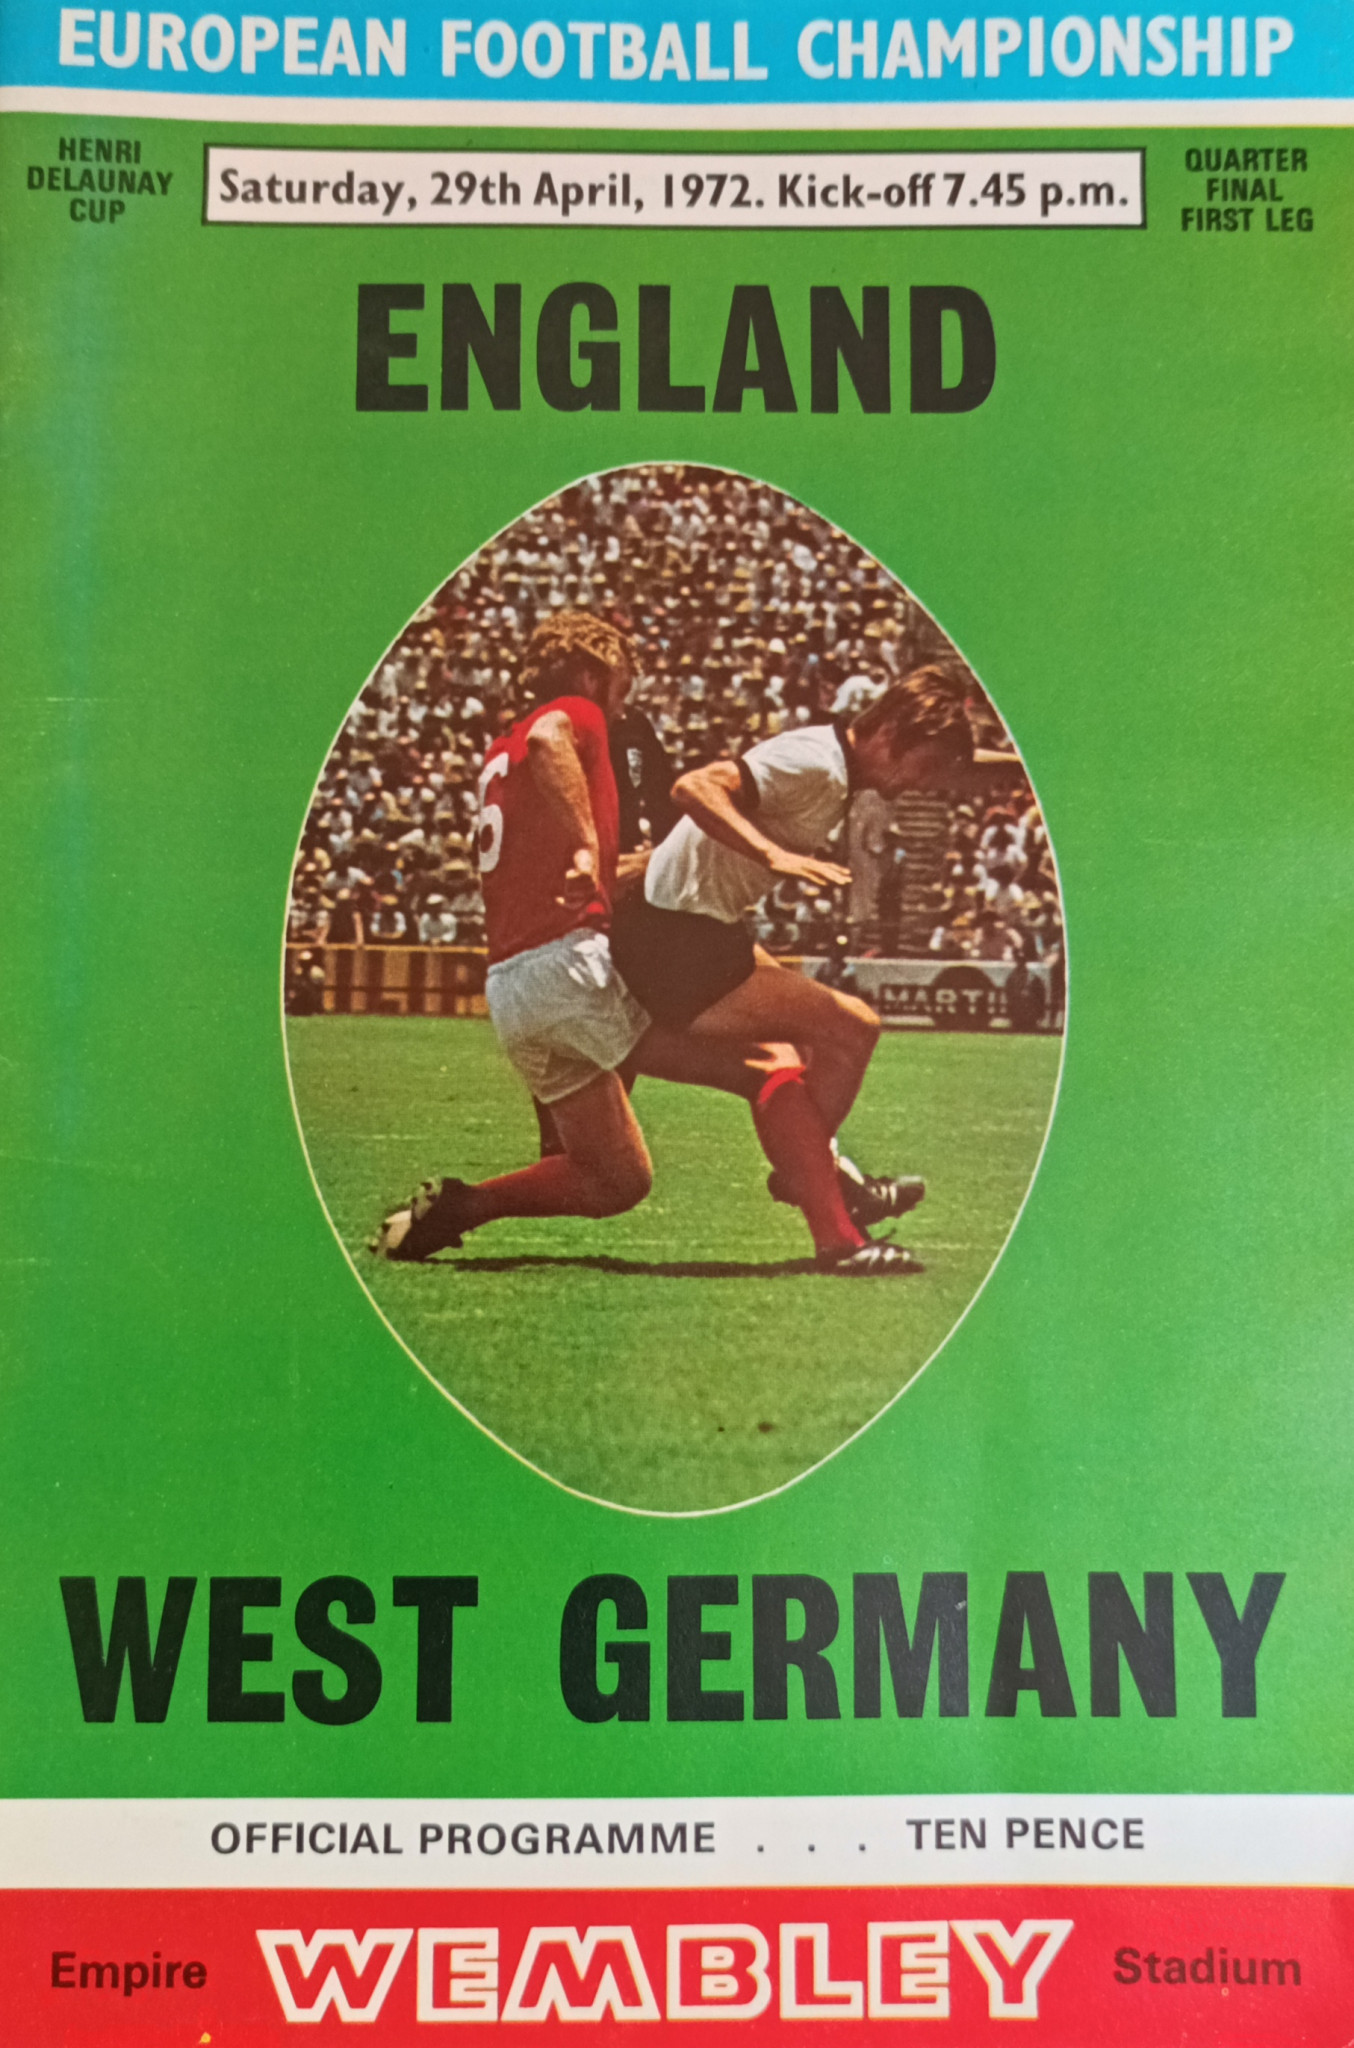 The programme notes suggested that West Germany would be 